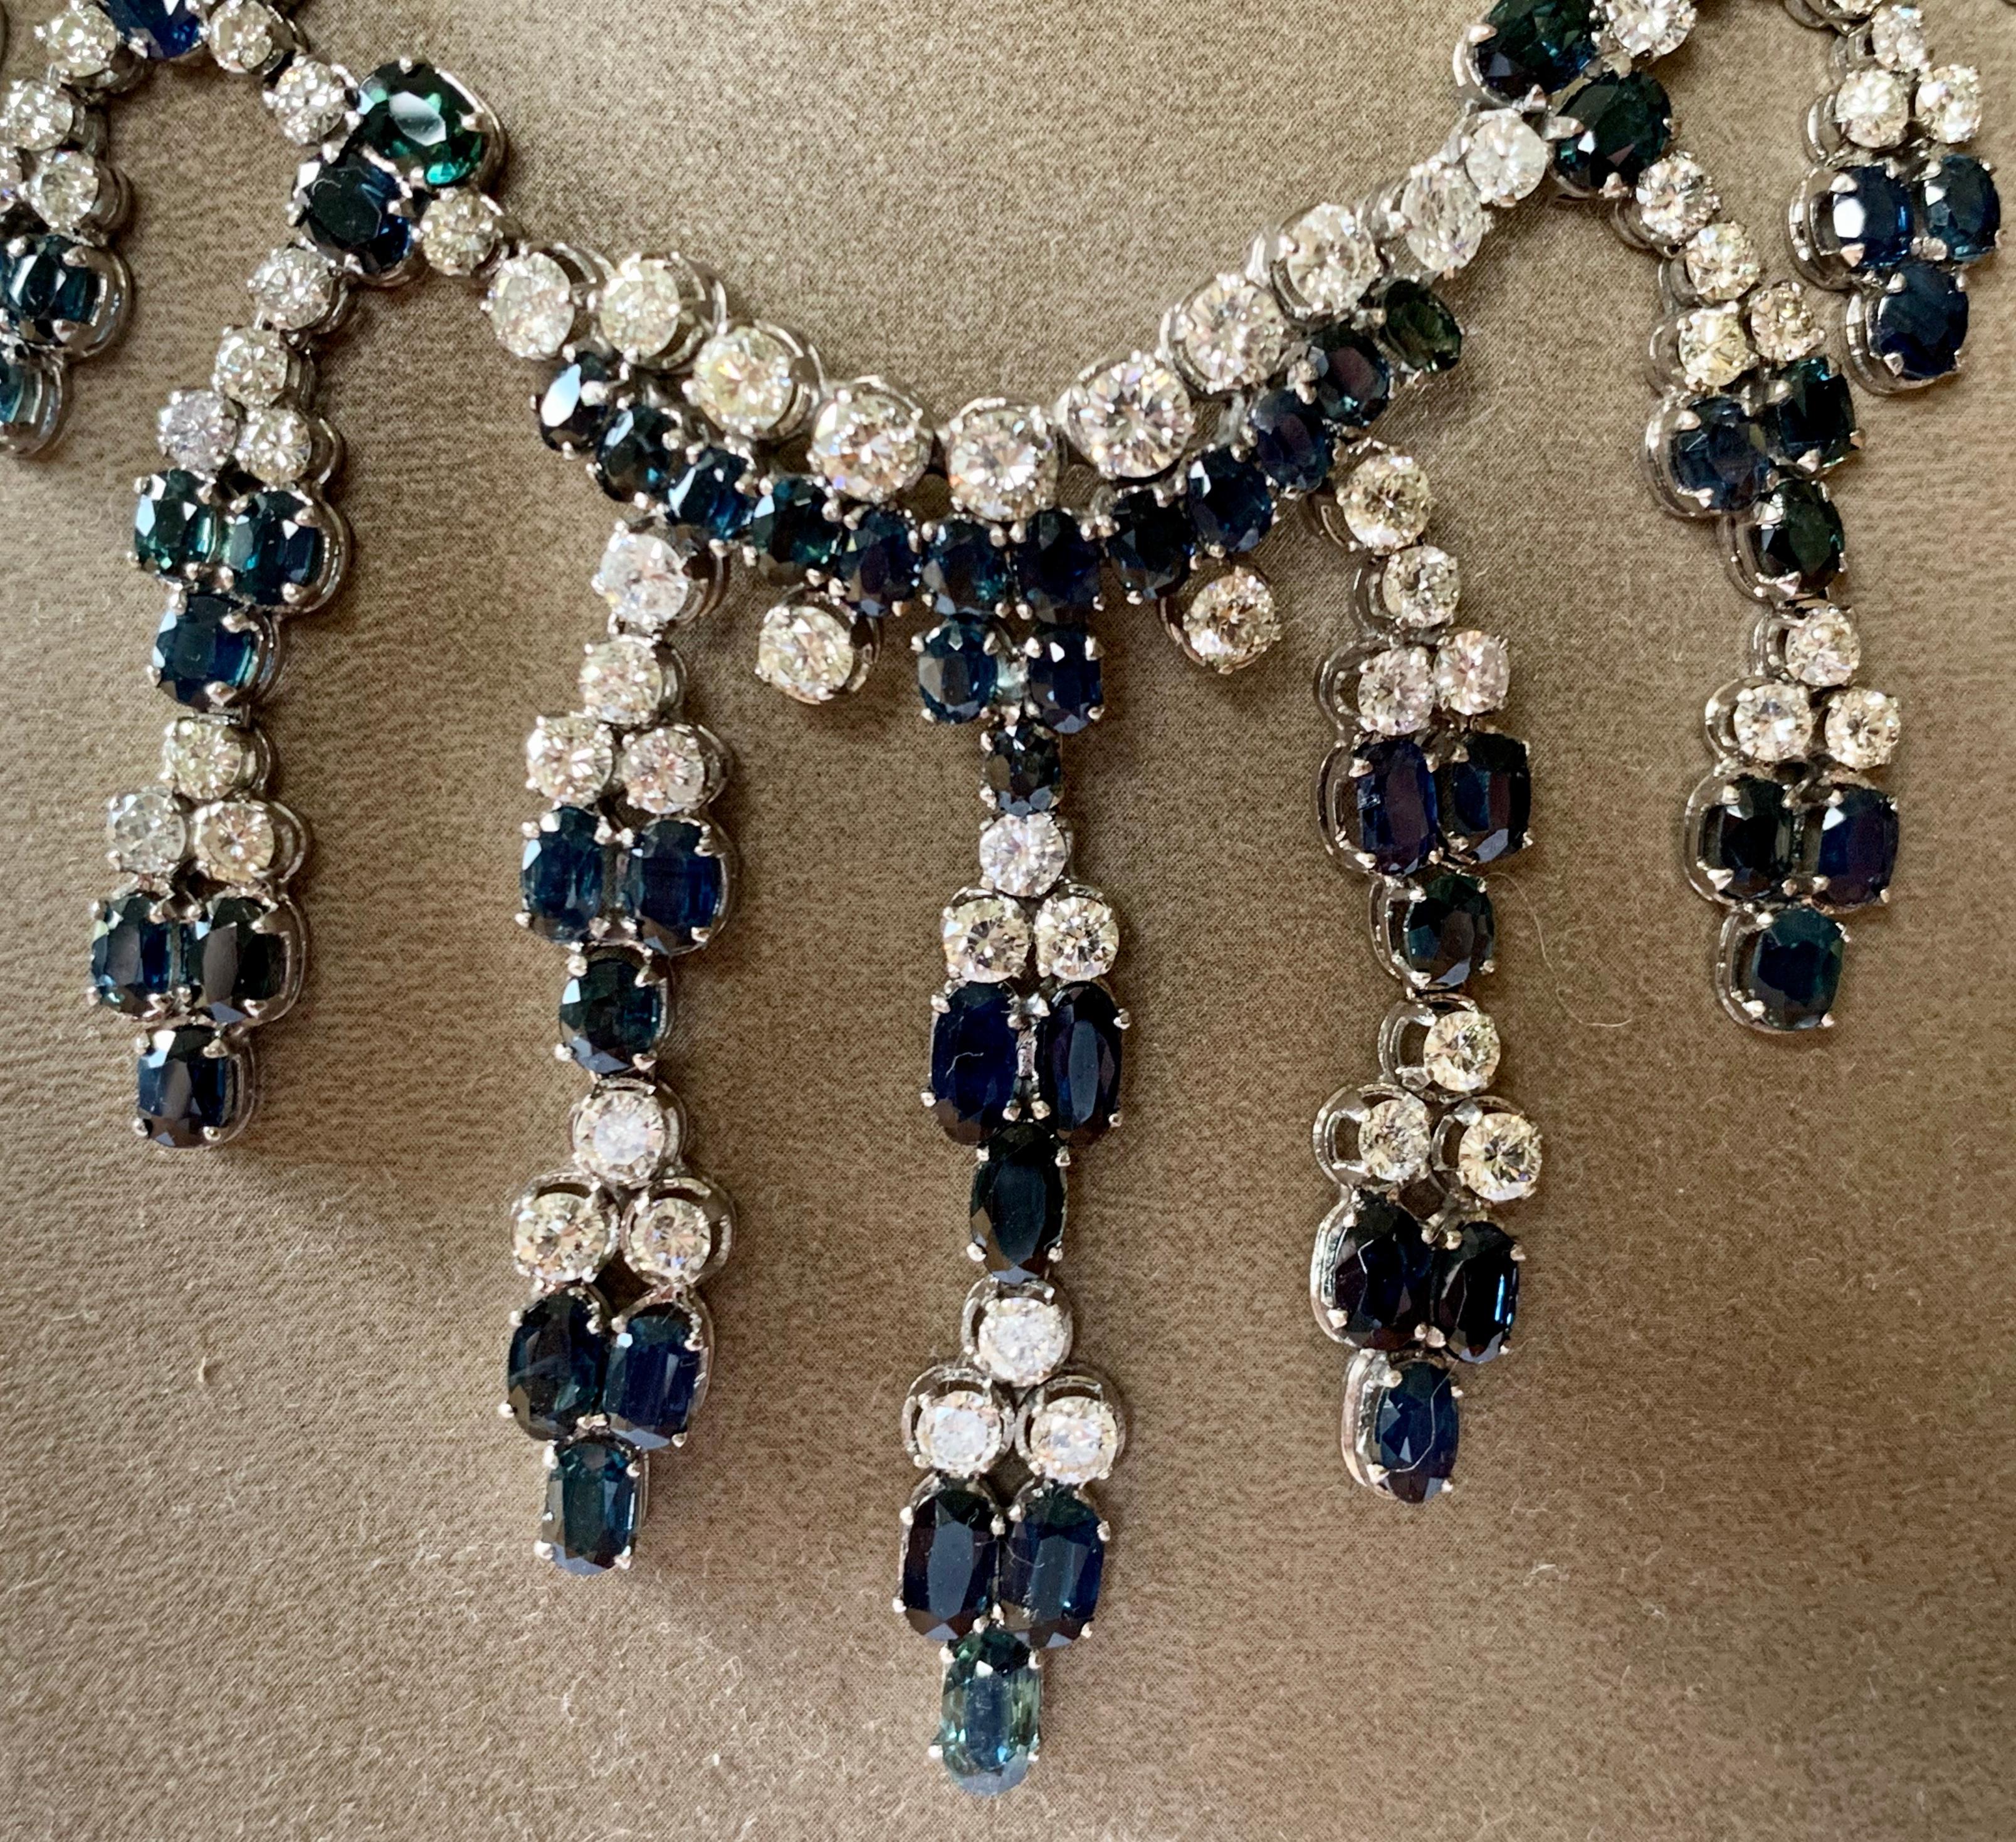 An eye catching and brilliant necklace showcasing 147 brillant cut Diamonds weighing approximately 19.0 ct, J color, si clarity and 131 blue Sapphires totaling ca. 21.0 ct., set in an intricate and fringe design. Made in 18 karat white gold.  